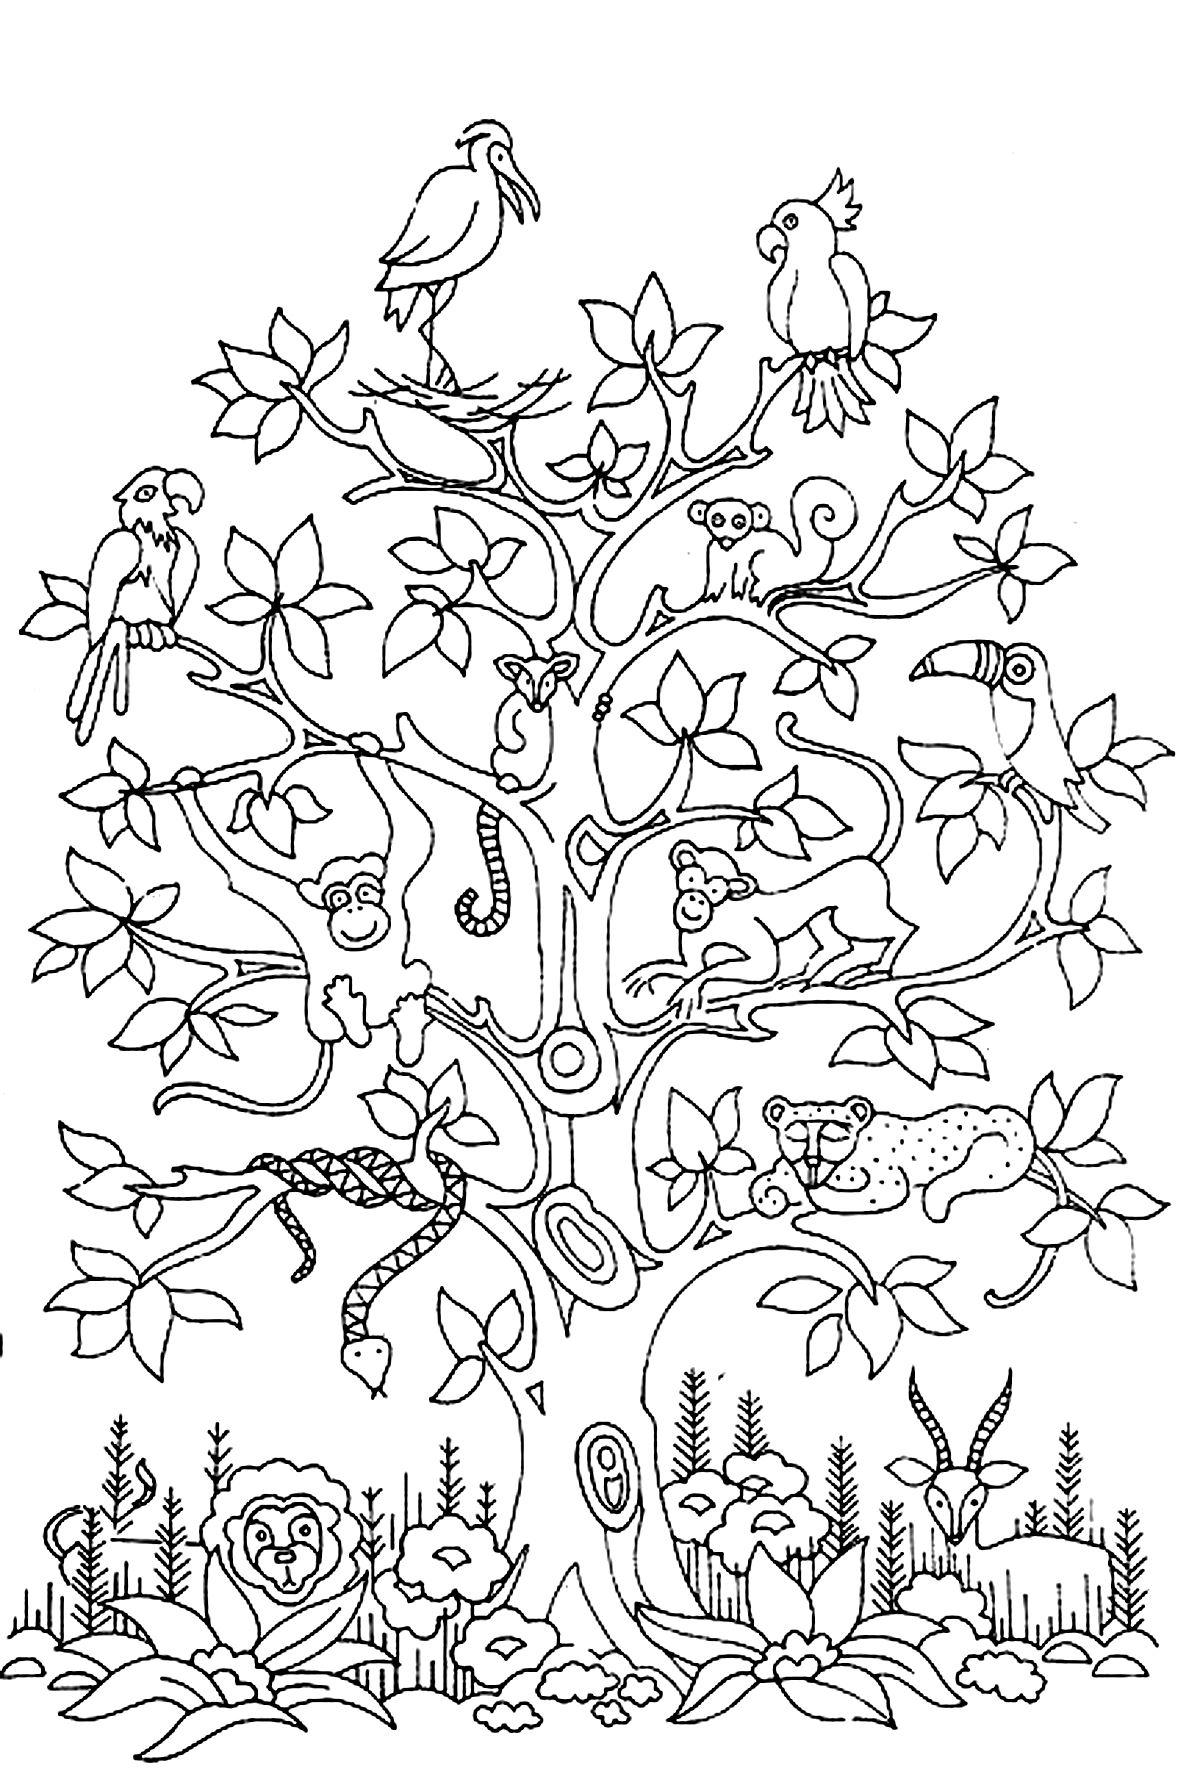 A tree with birds, butterflies and even monkey !